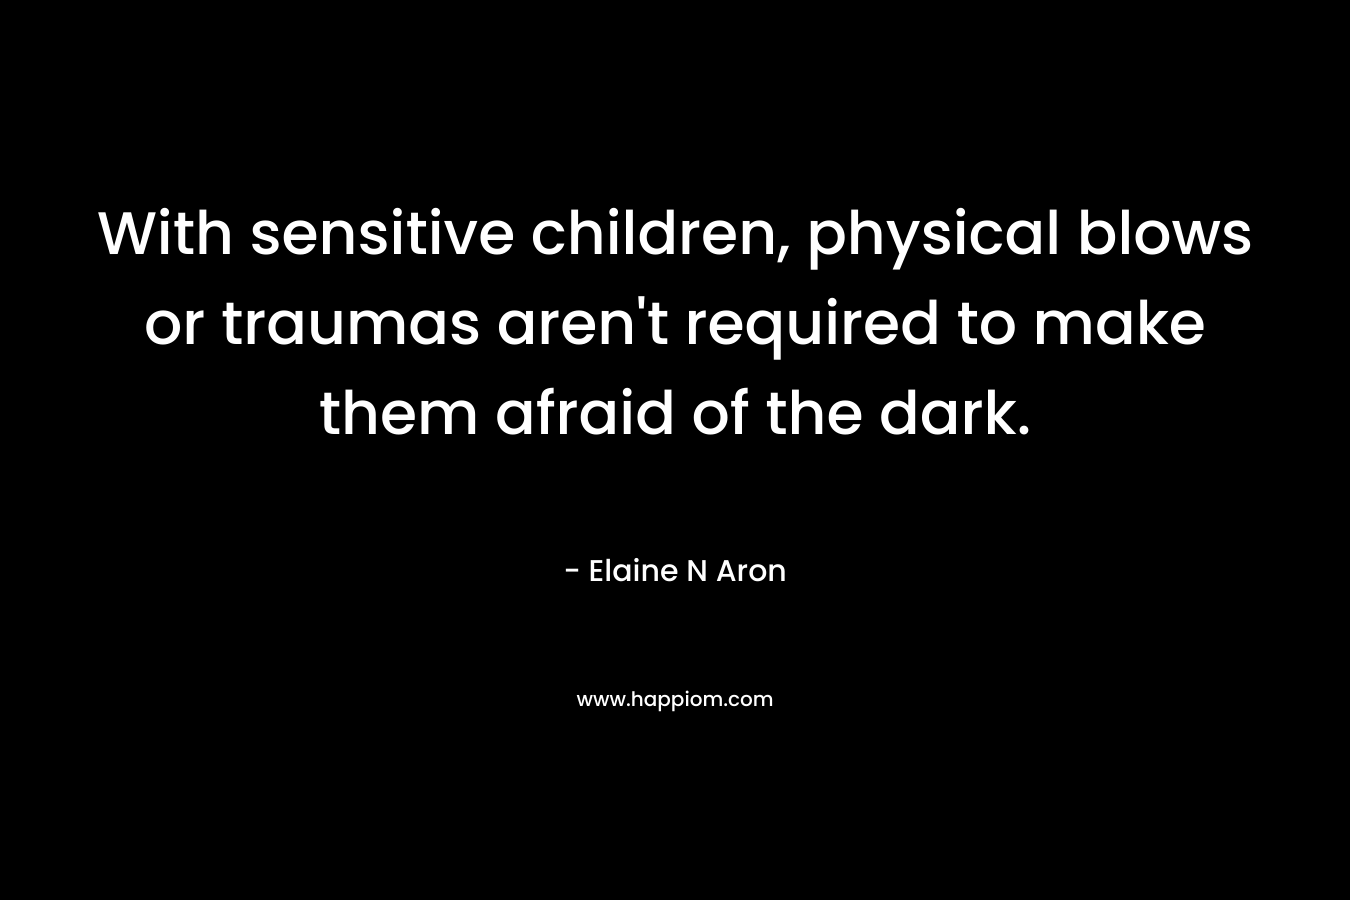 With sensitive children, physical blows or traumas aren't required to make them afraid of the dark.